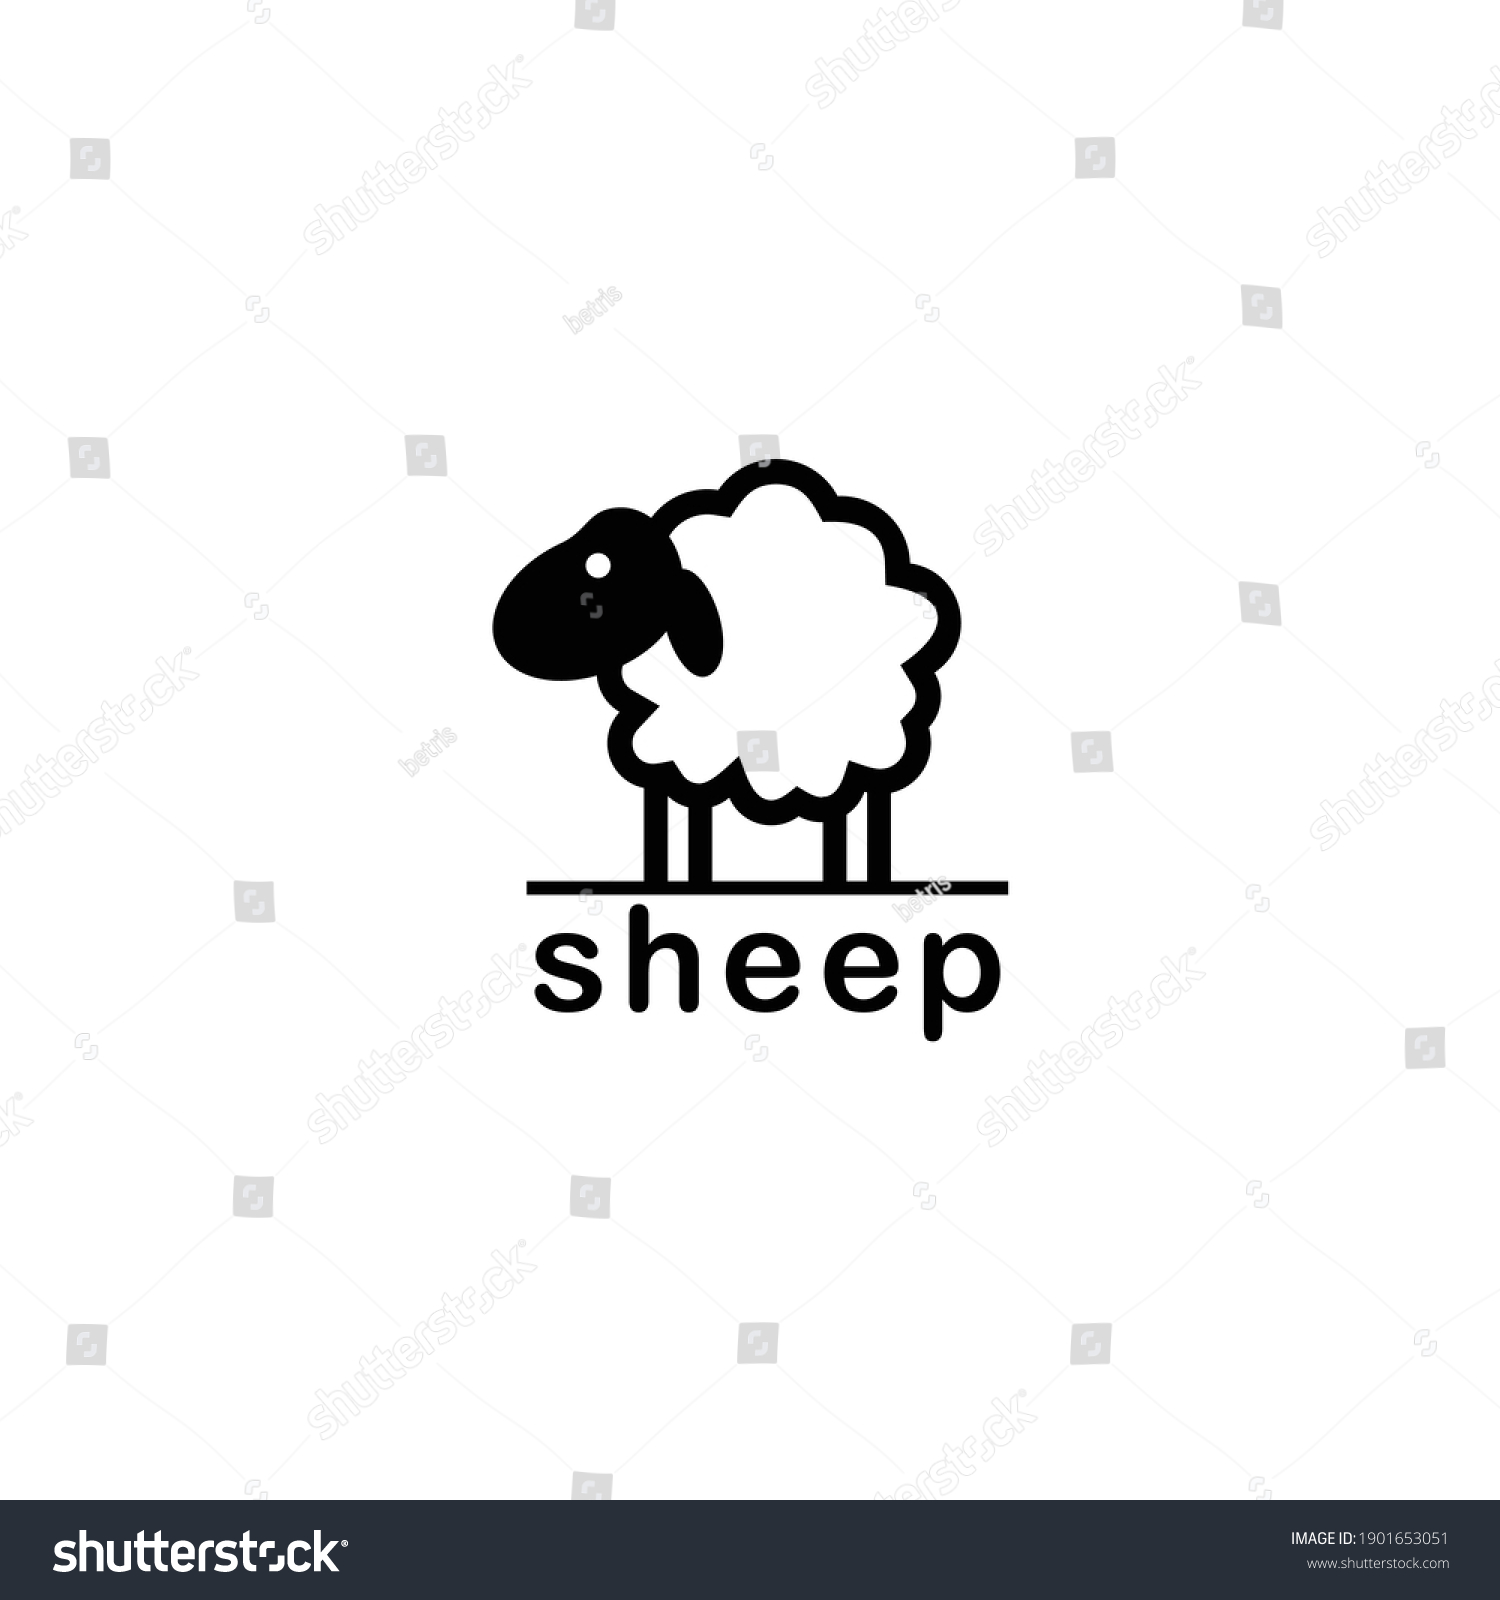 3,728 Sheep funny logo Images, Stock Photos & Vectors | Shutterstock